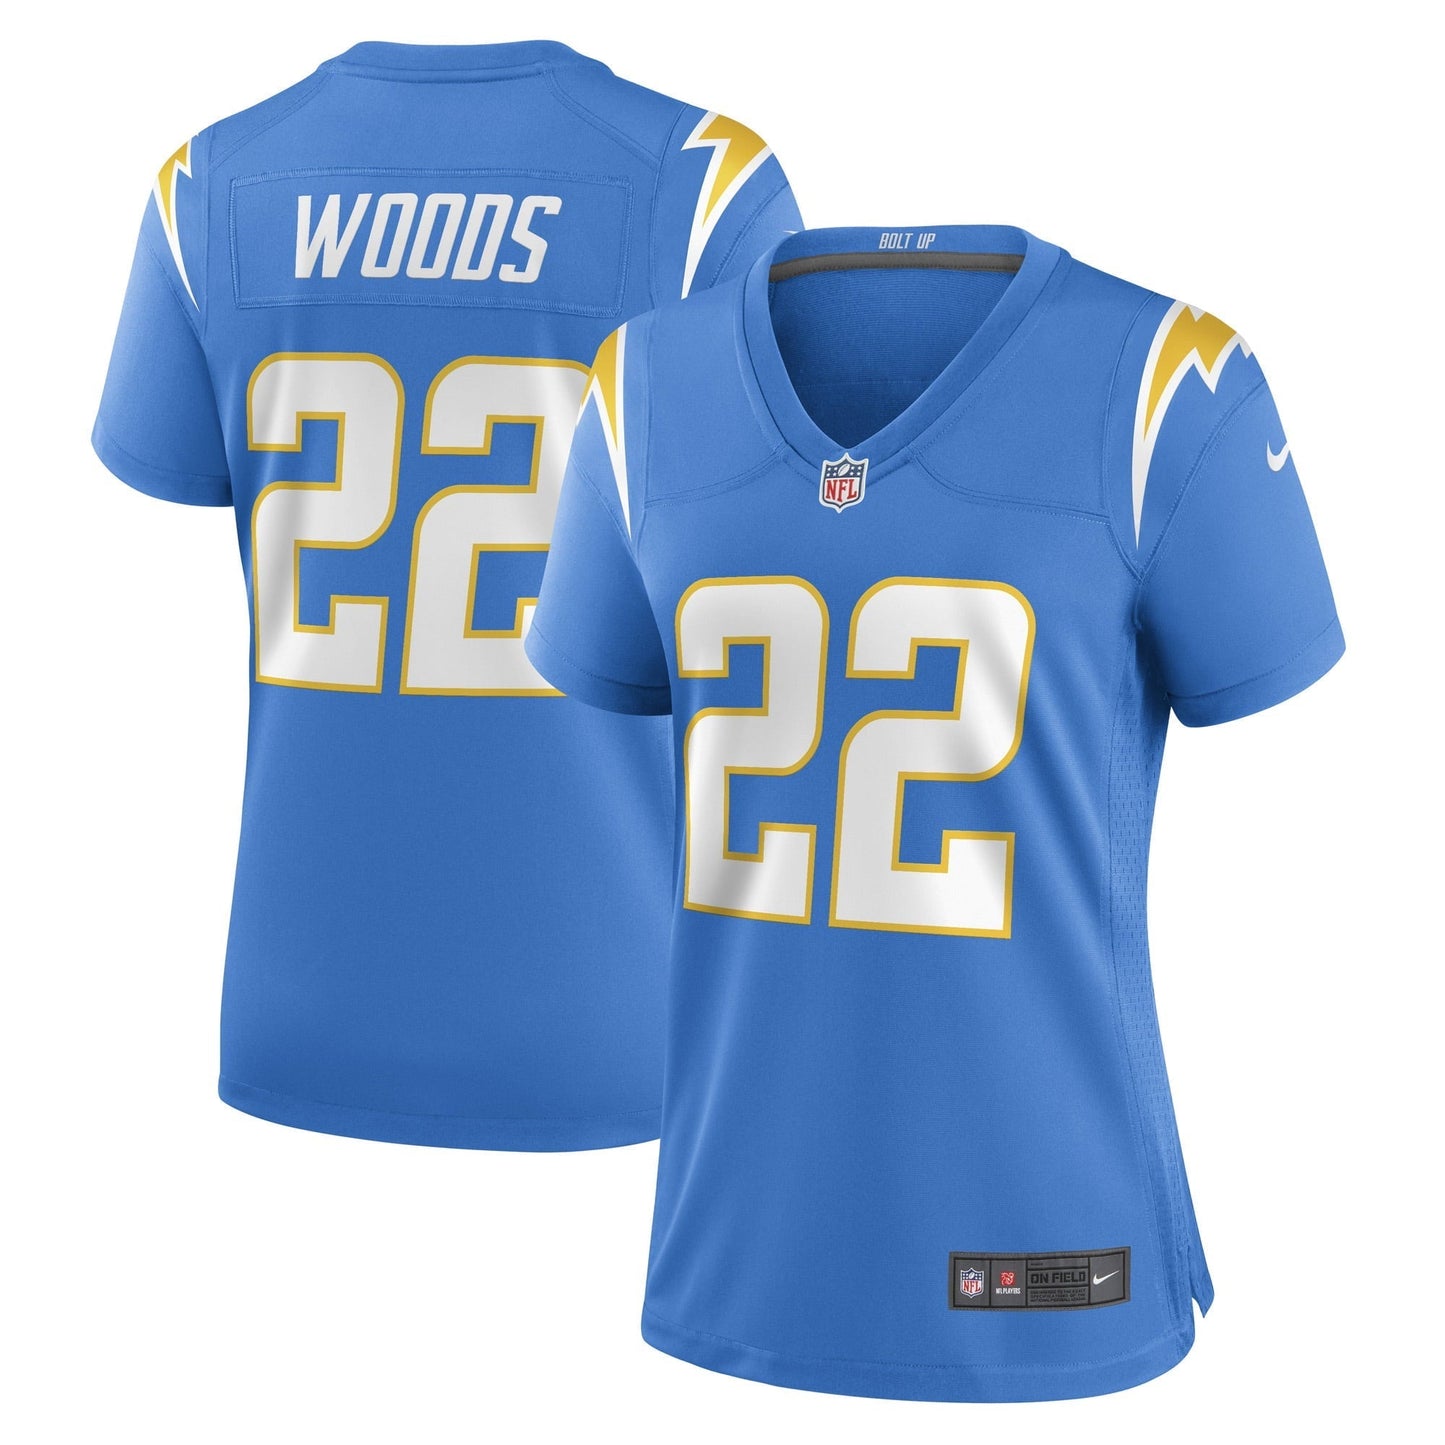 Women's Nike JT Woods Powder Blue Los Angeles Chargers Game Player Jersey